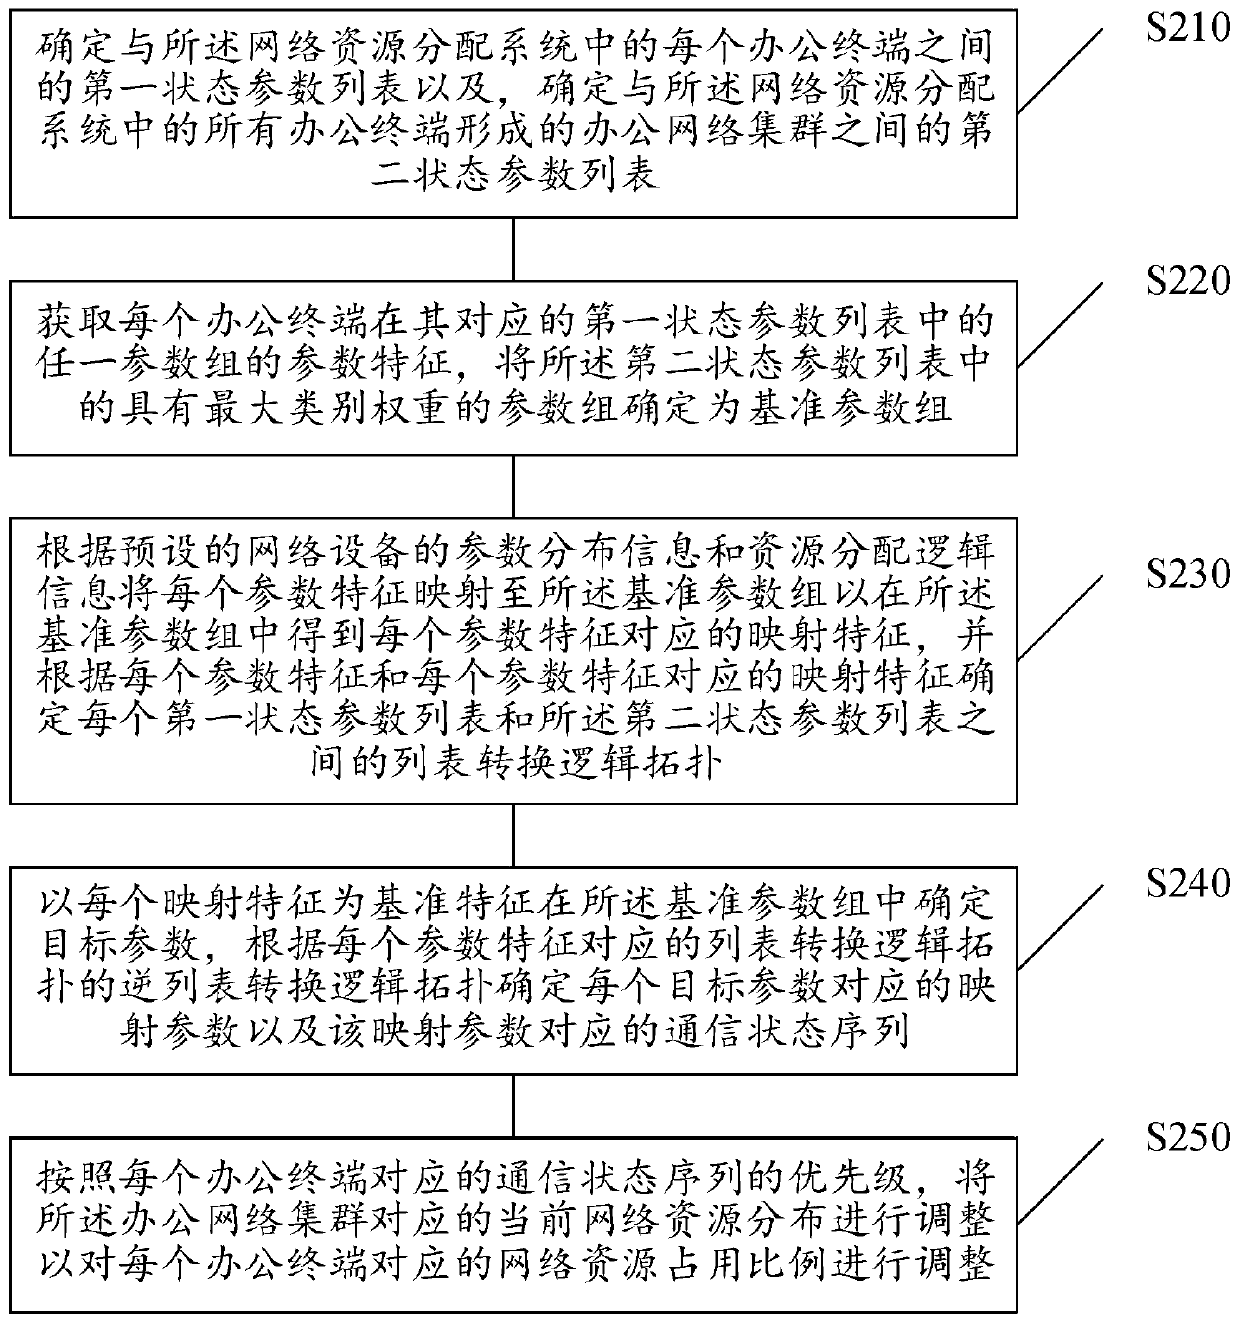 Network resource allocation method and system applied to online office, and network equipment